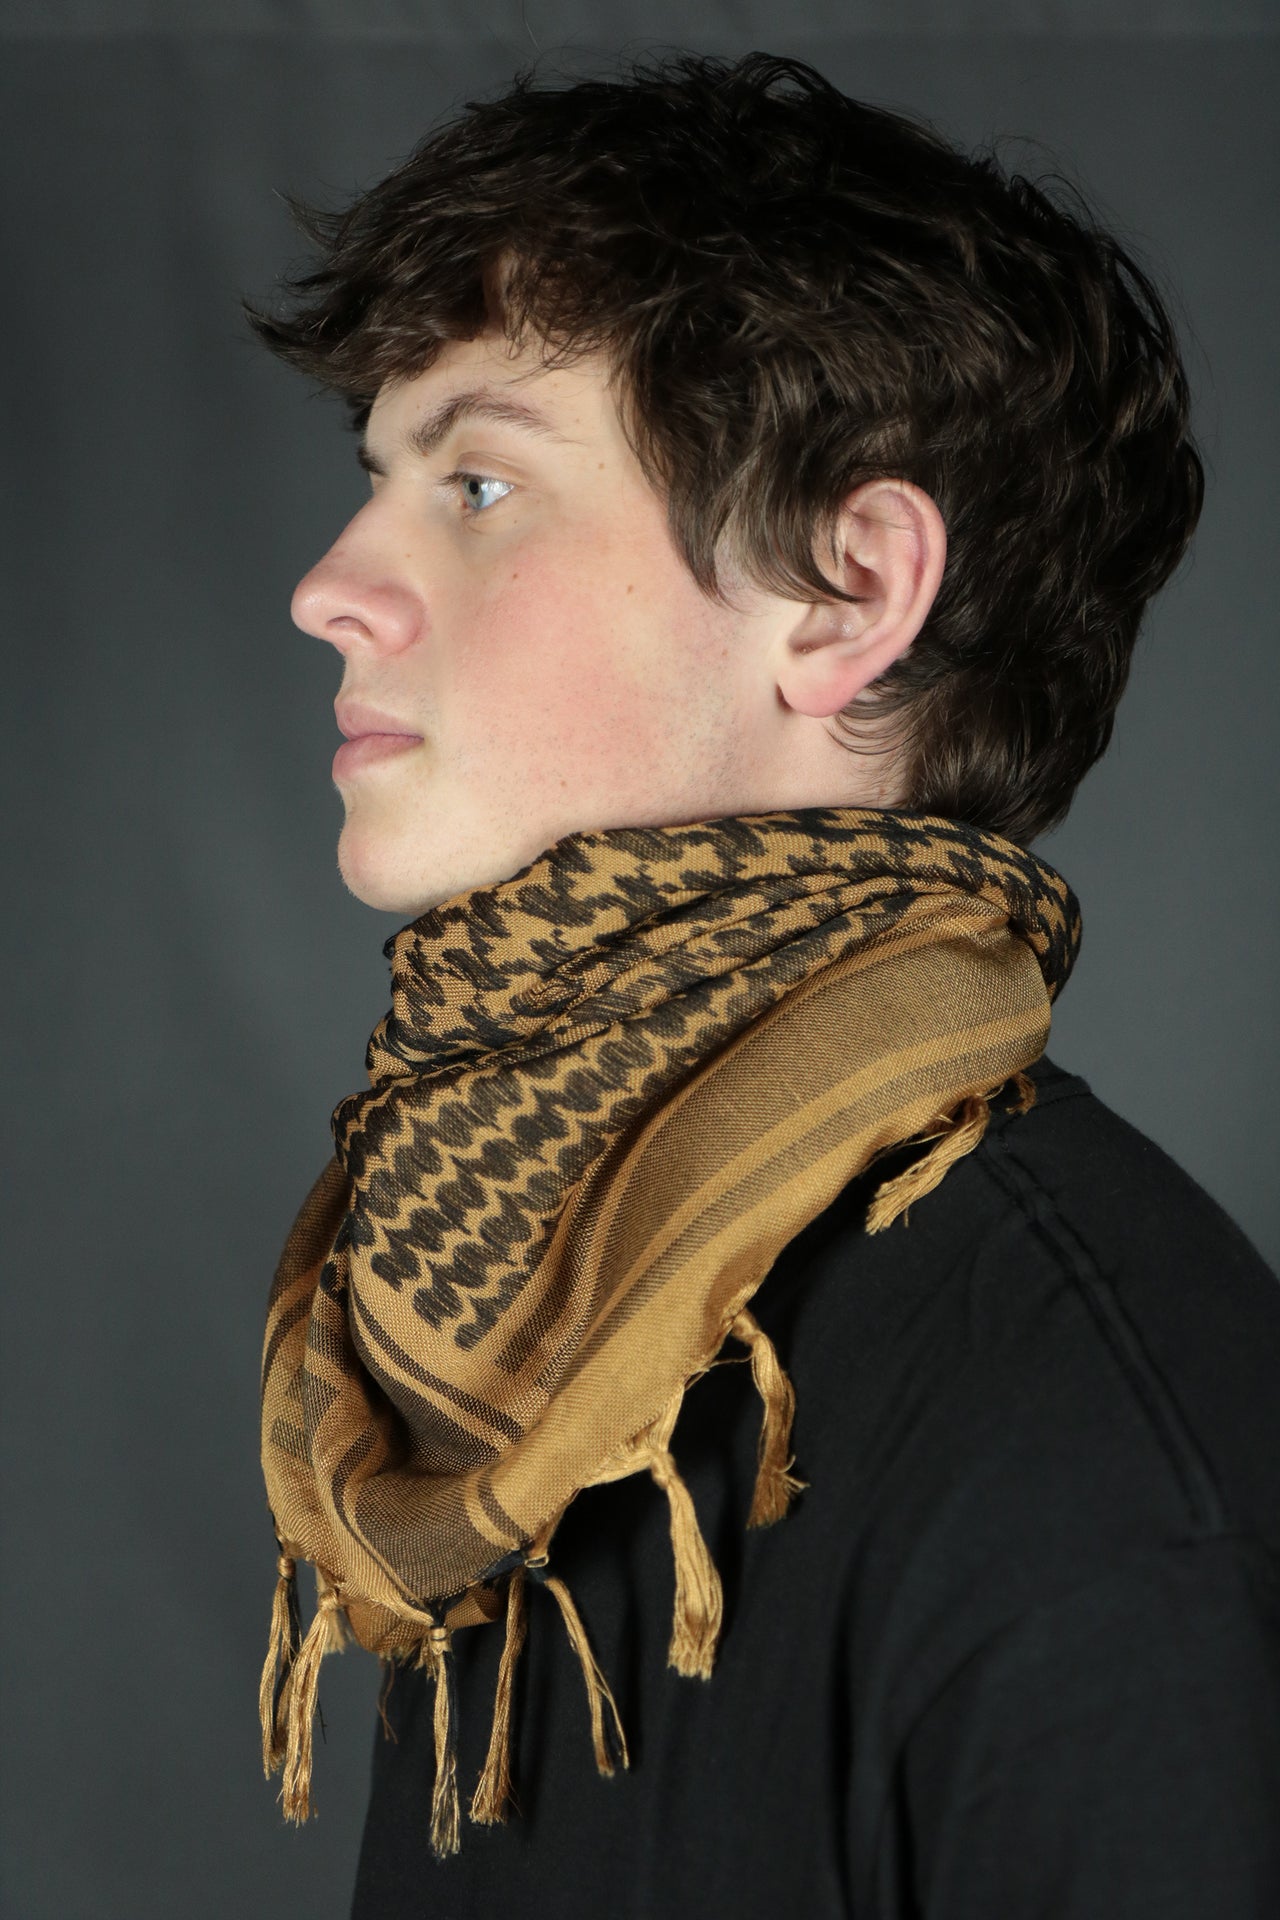 Arabic Sheik Print Shemagh Scarf | Black and Brown Face Scarf